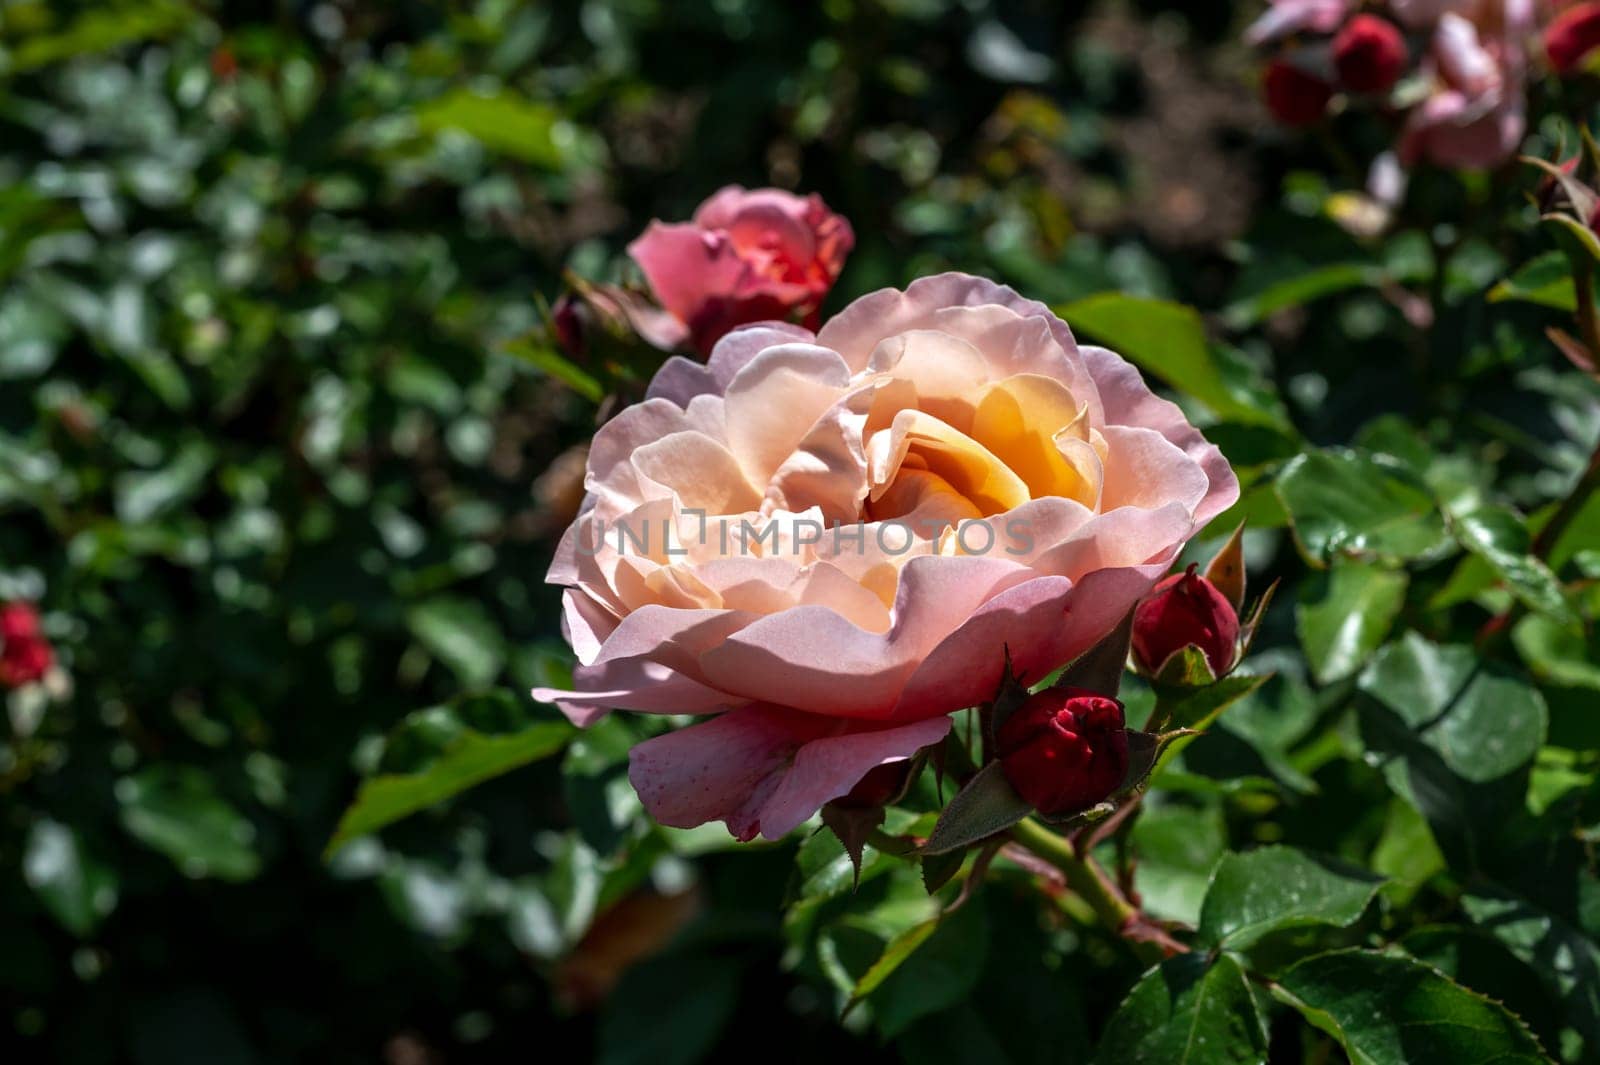 Beautiful Blooming pink rose in a garden on a green leaves background